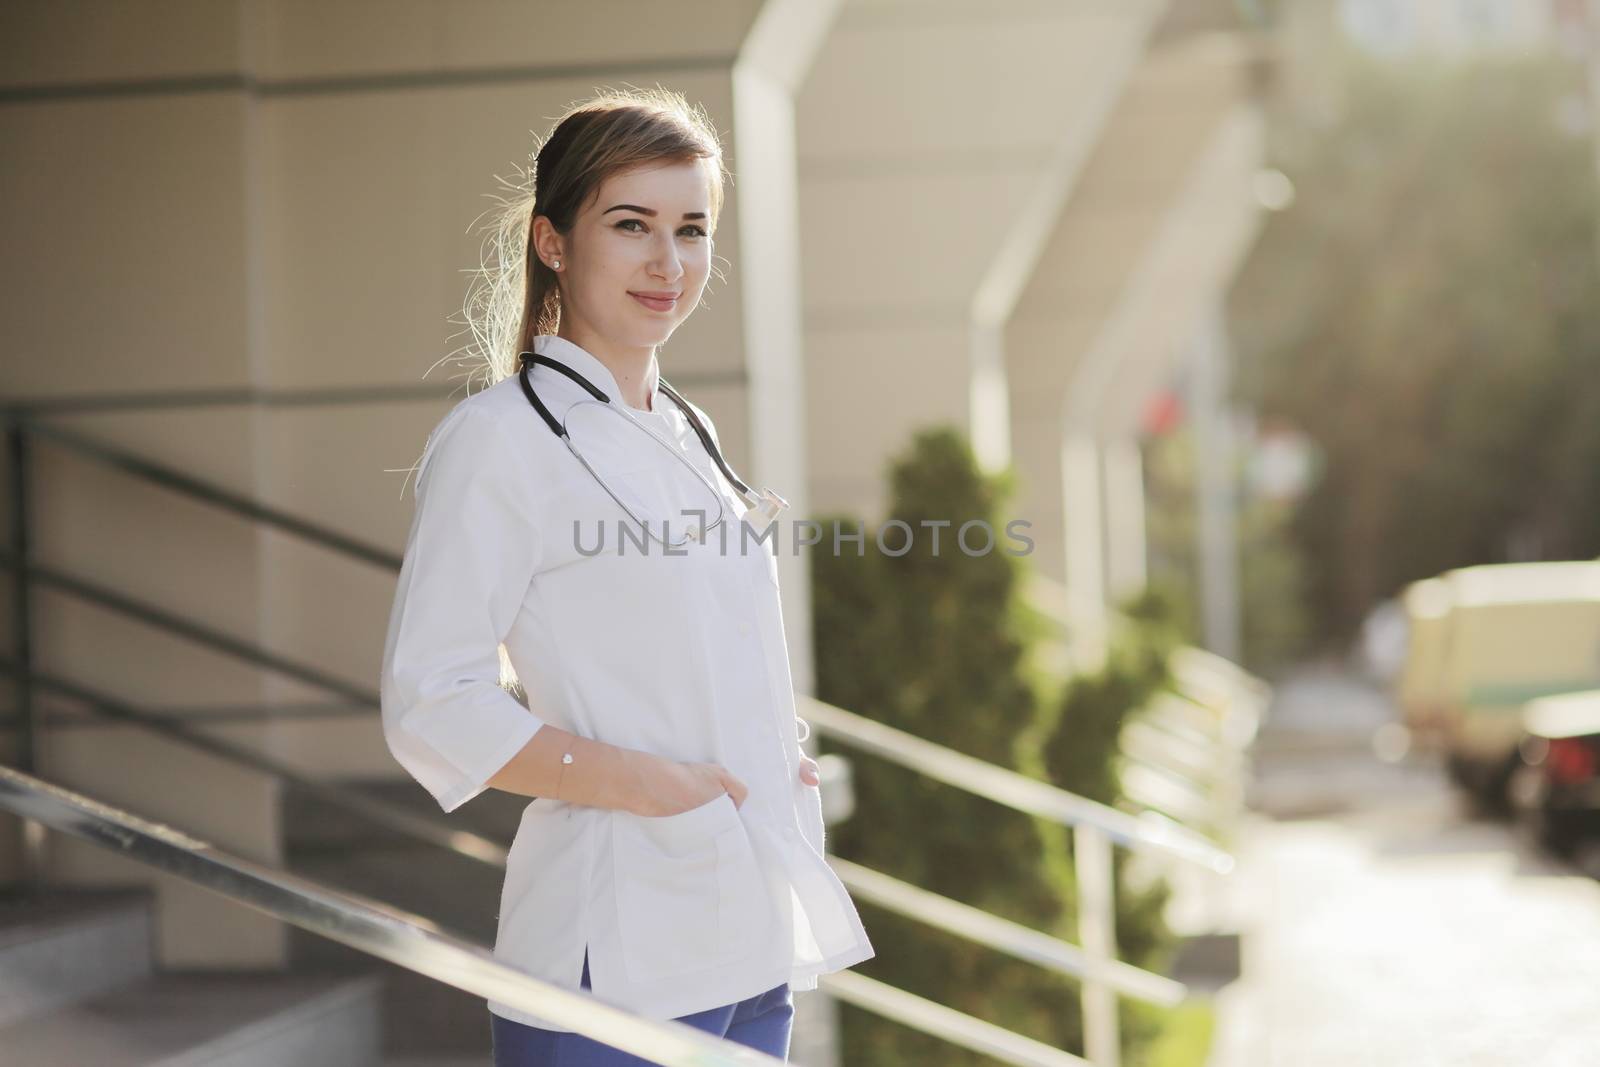 Portrait of a beautiful female doctor or nurse. Prevention Covid-19 healthcare concept. Stethoscope over the neck. Woman, girl.